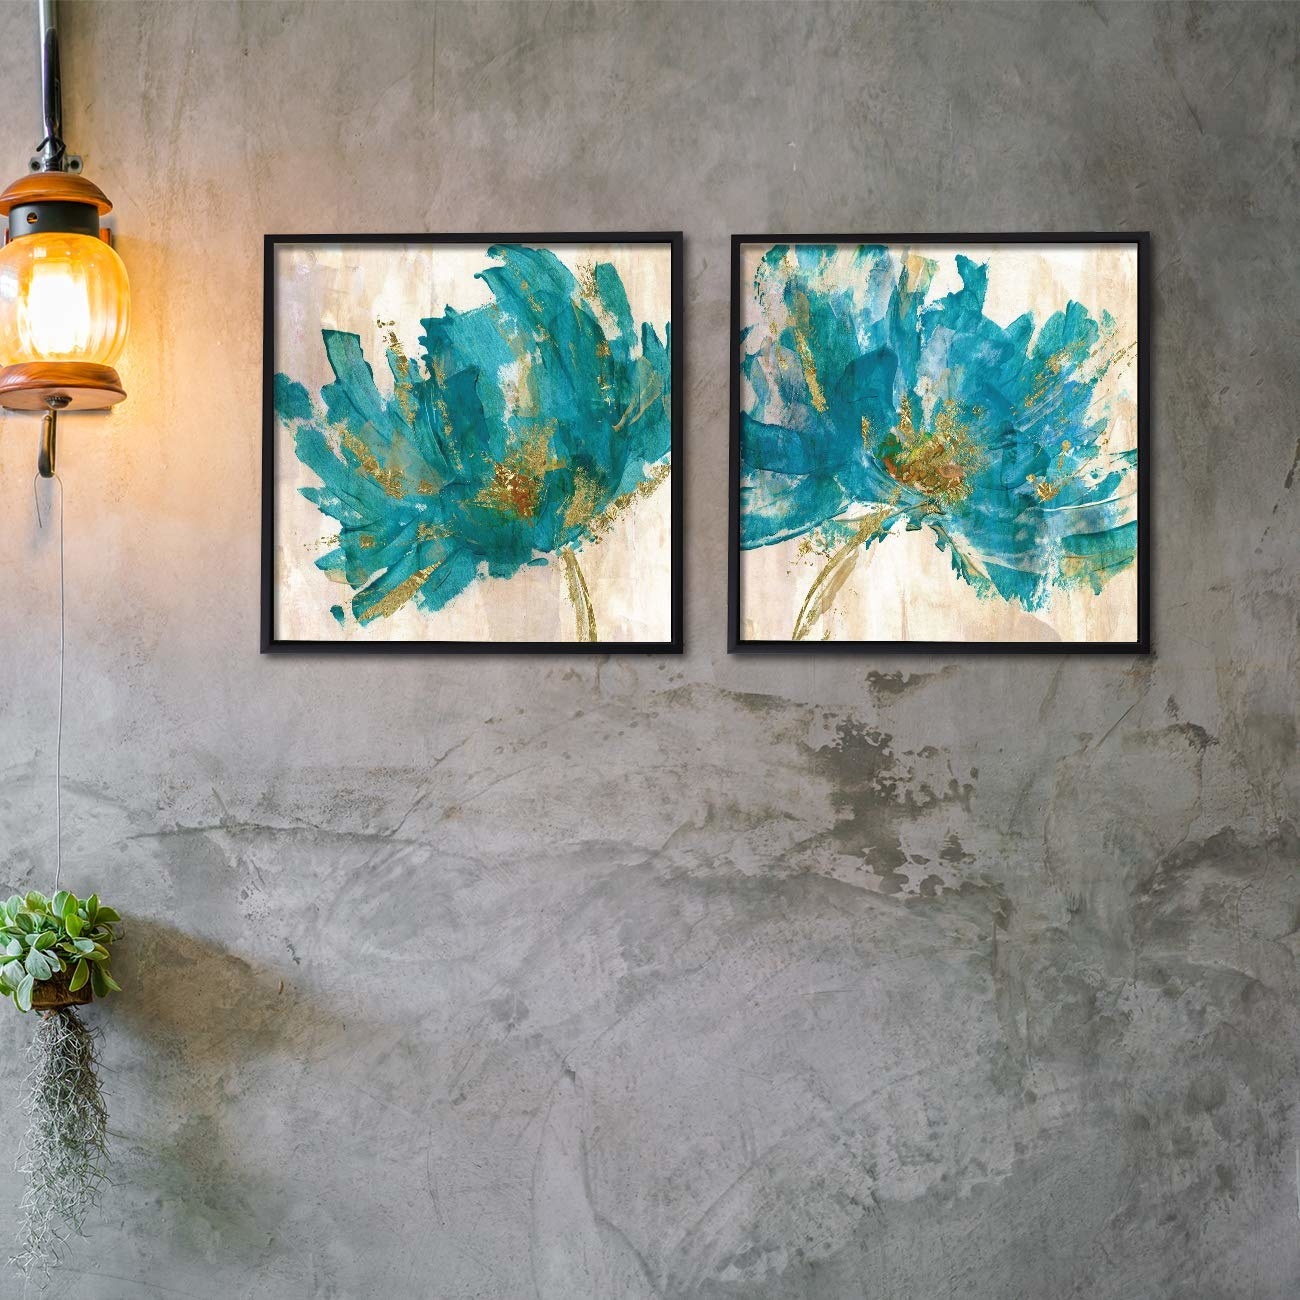 Floral canvas paintings done in blue and gold.